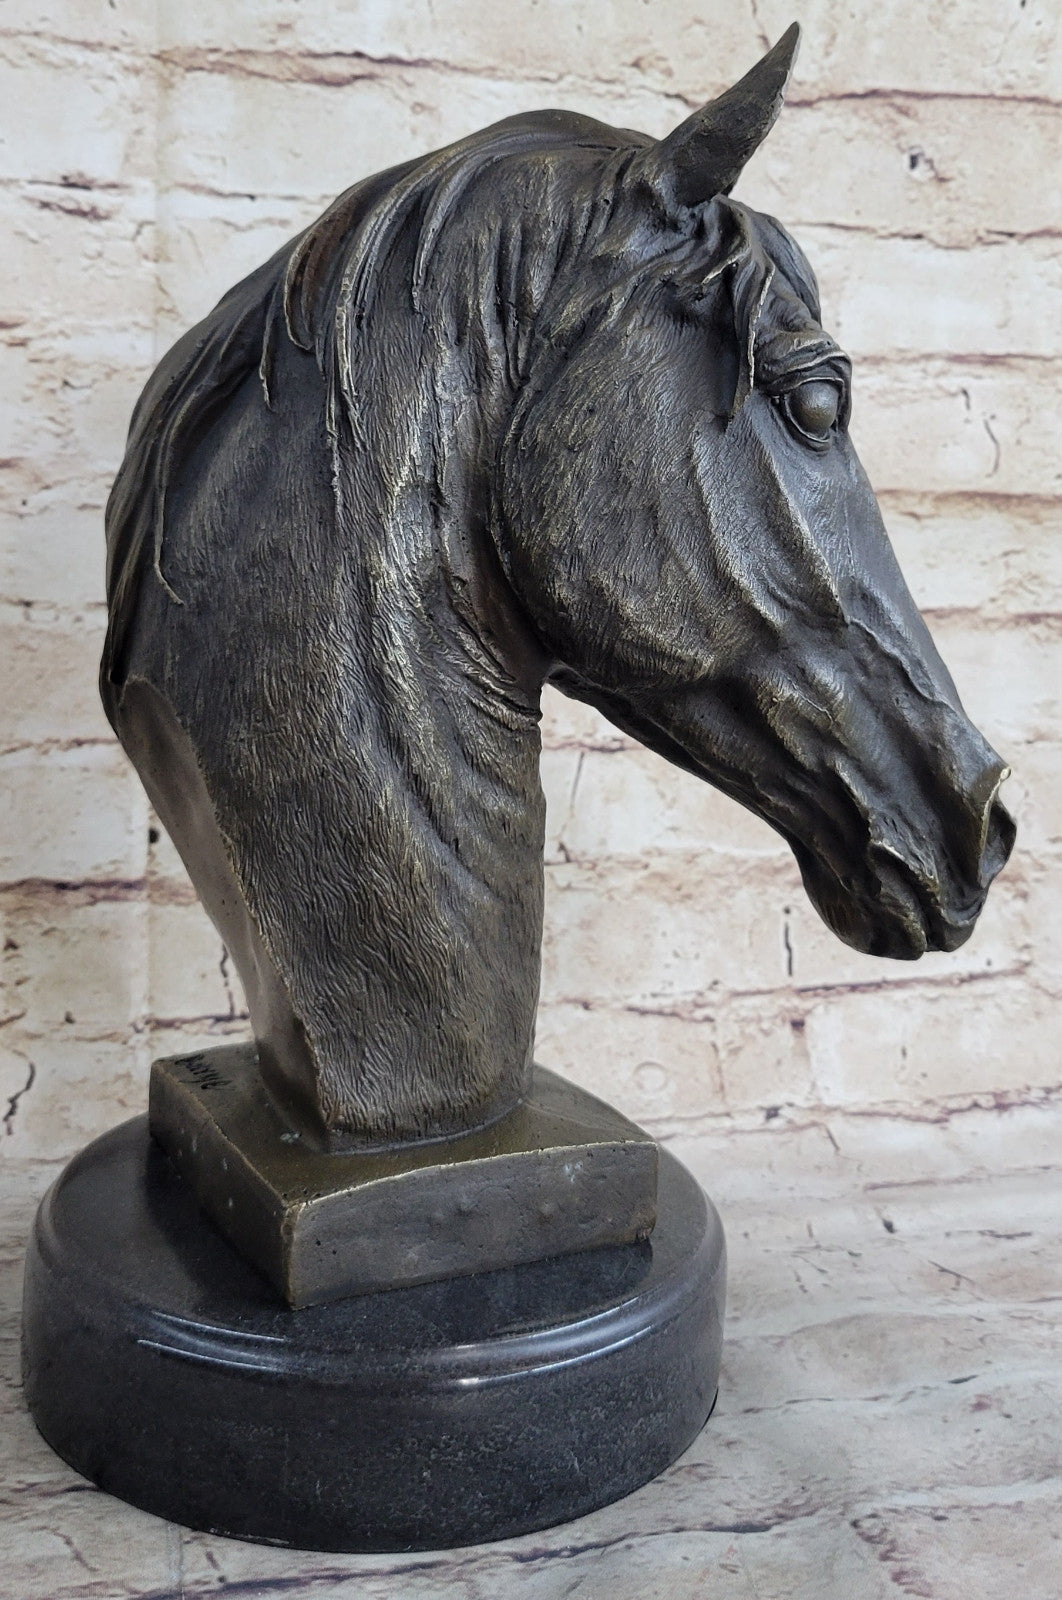 Handcrafted bronze sculpture SALE Head Horse Bust Unique Barye Signed Figurine